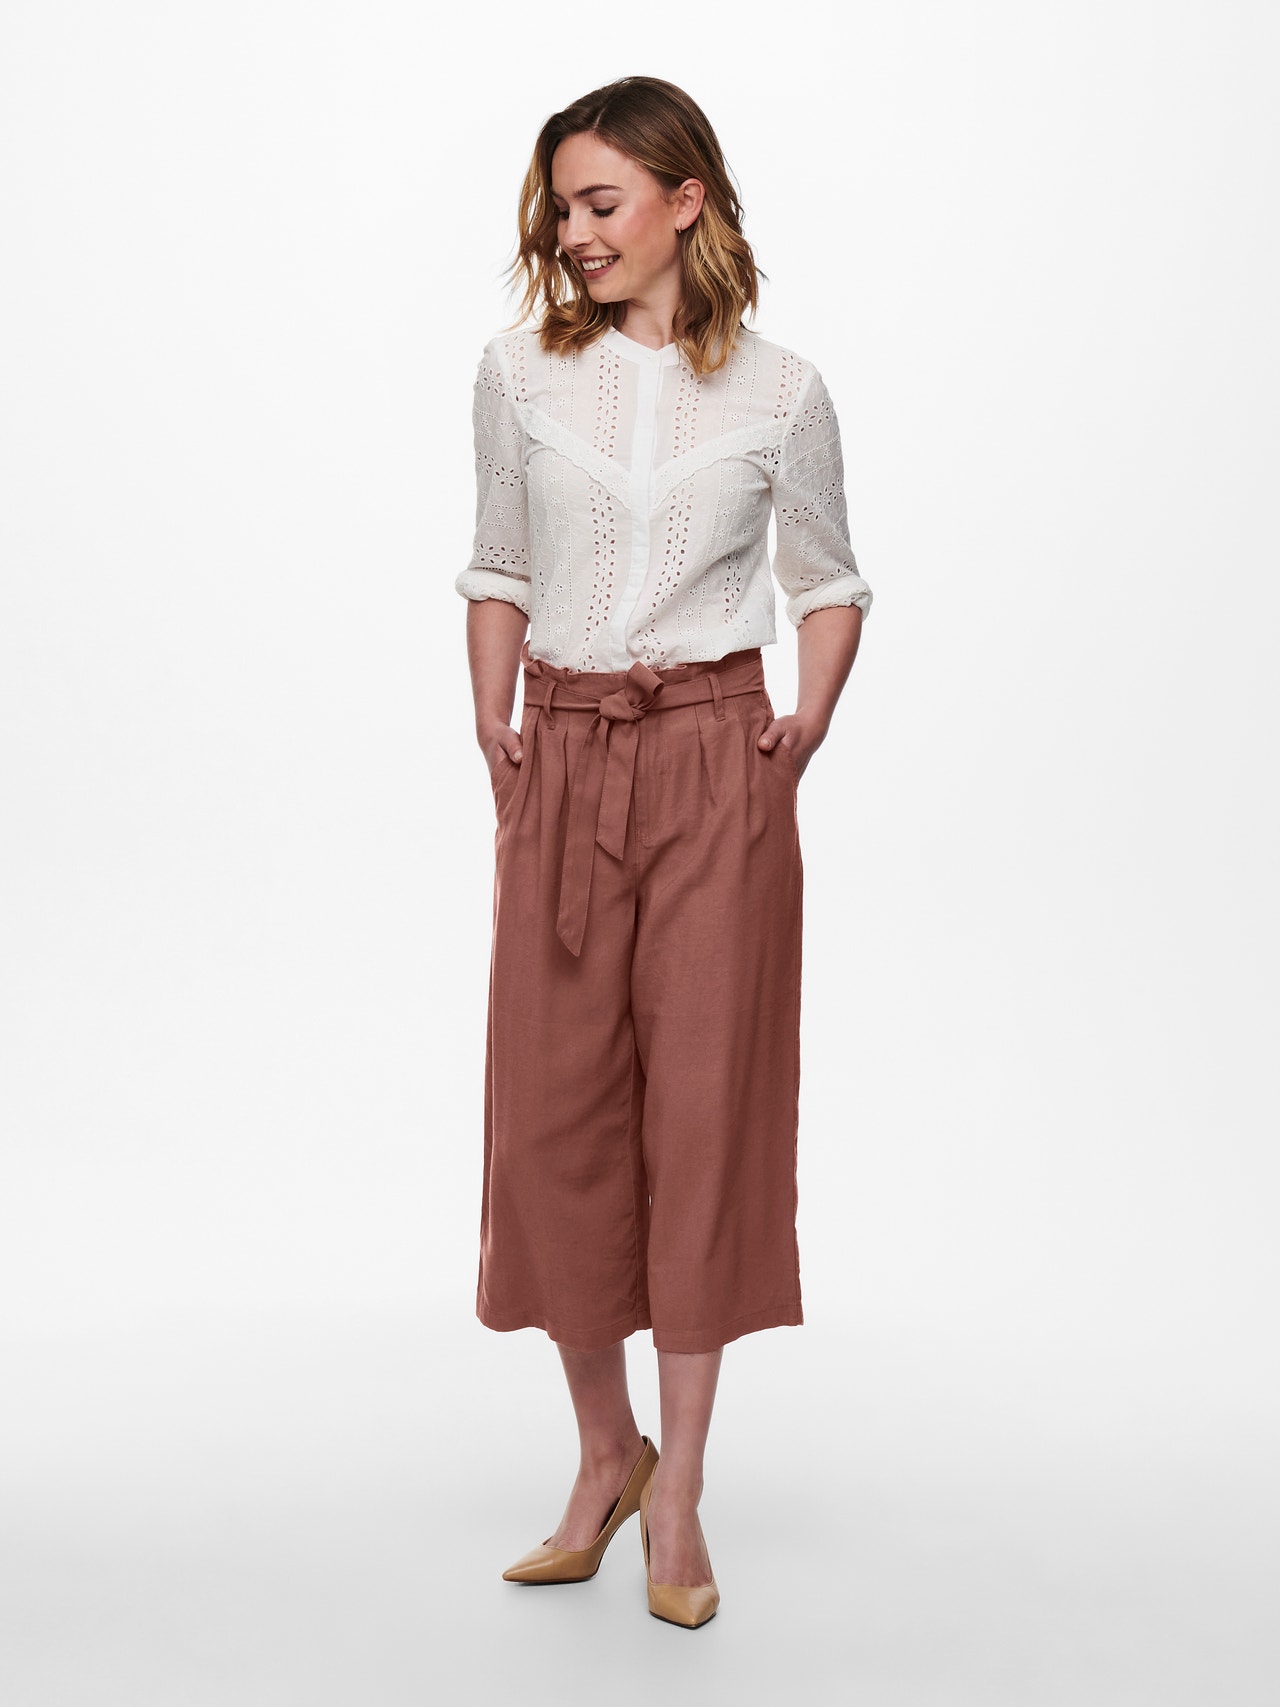 ONLY Culotte Trousers -Apple Butter - 15198918